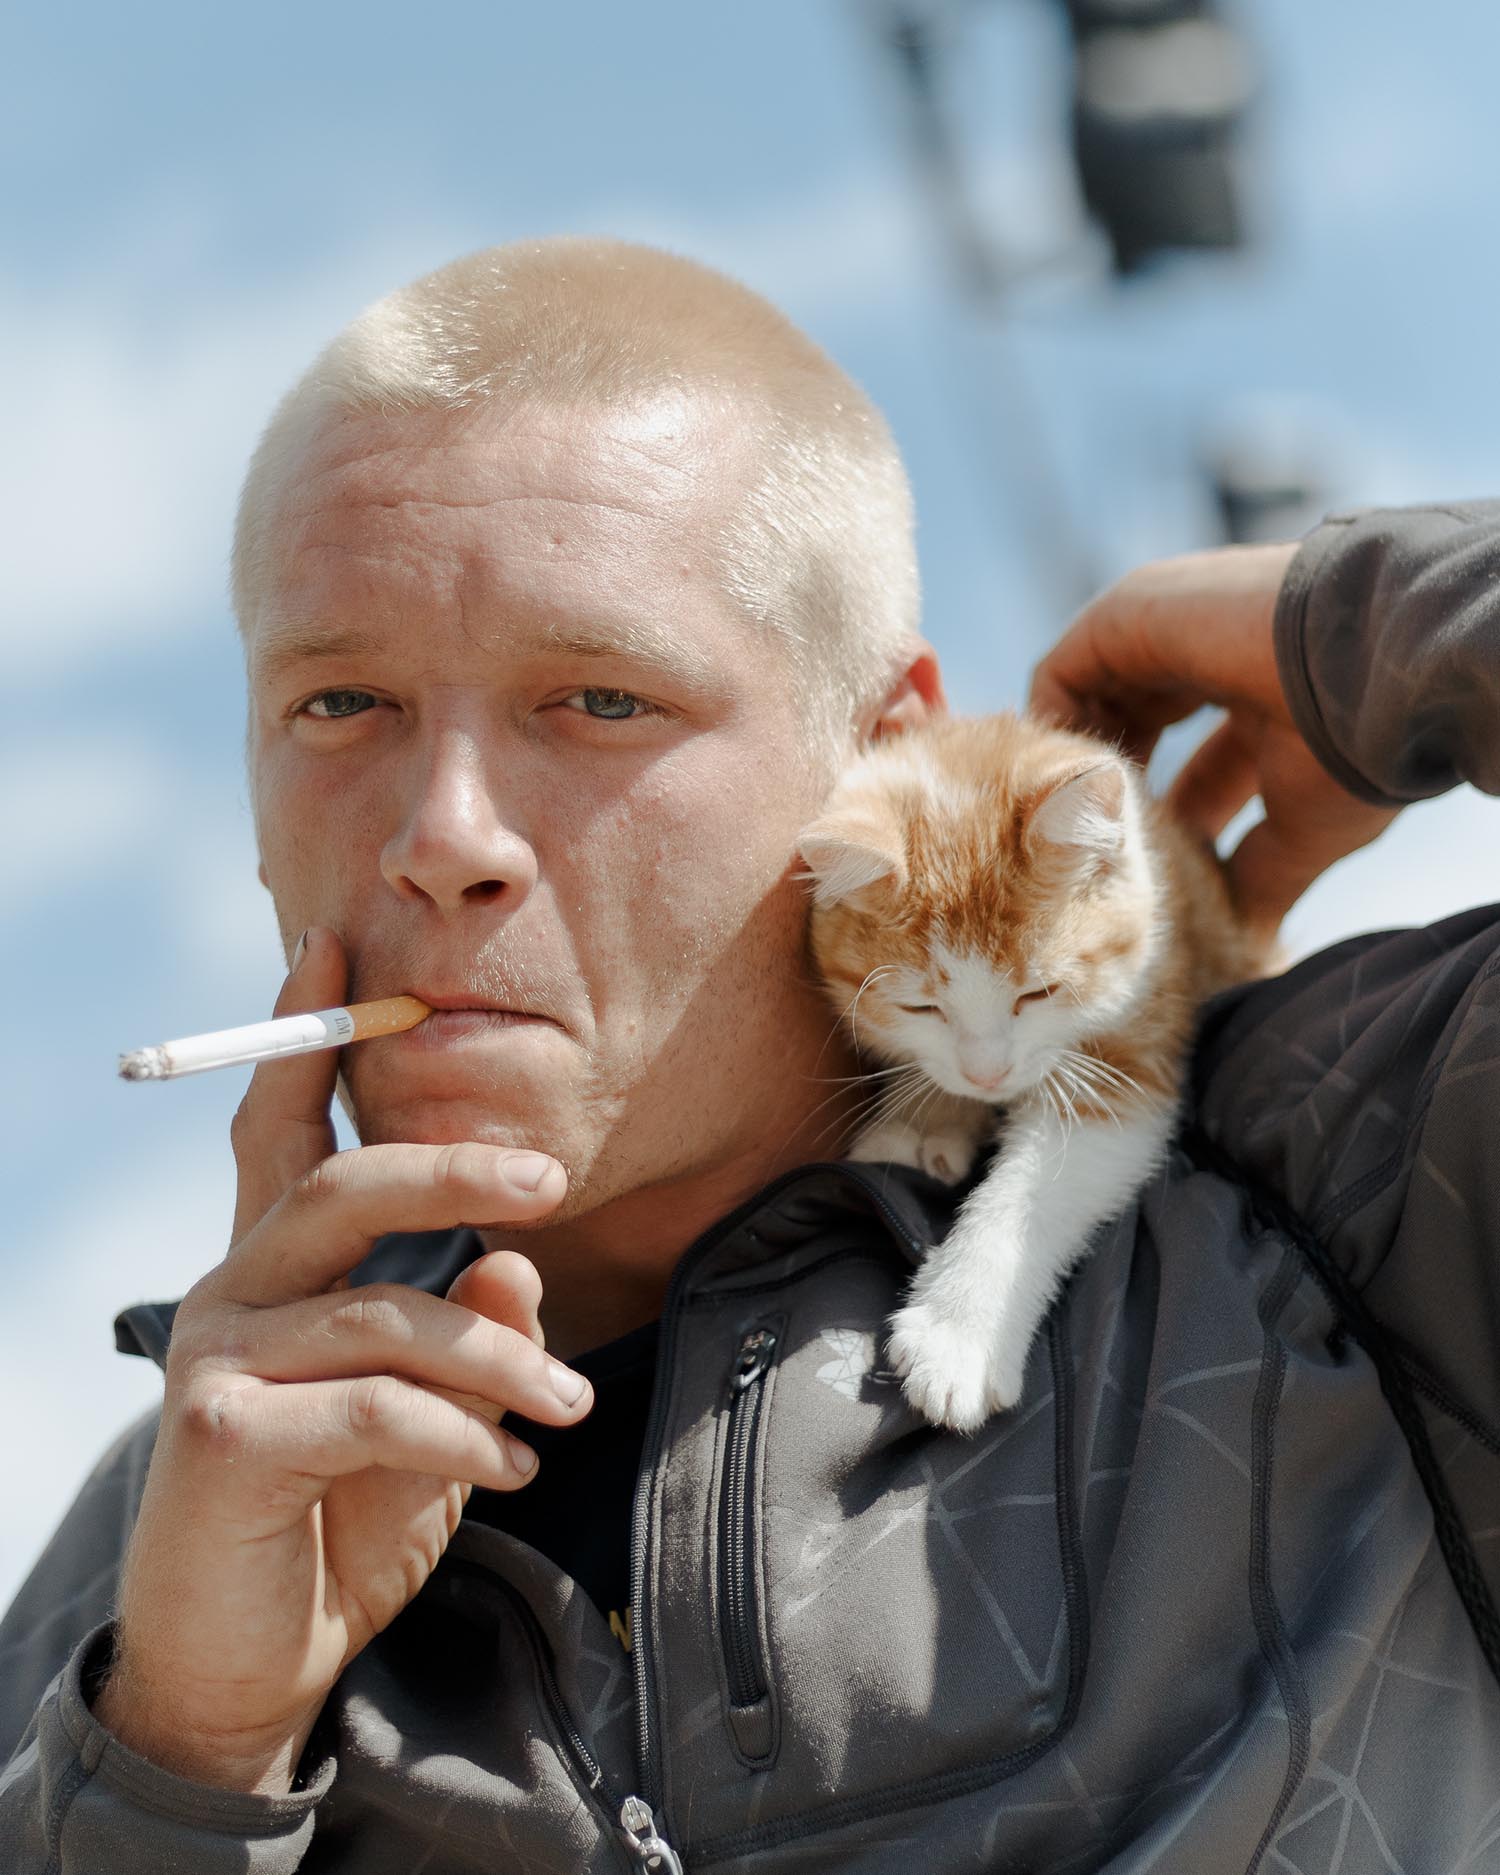 man in leather jacket smoking while a white and orange kitten sits on him shoulder